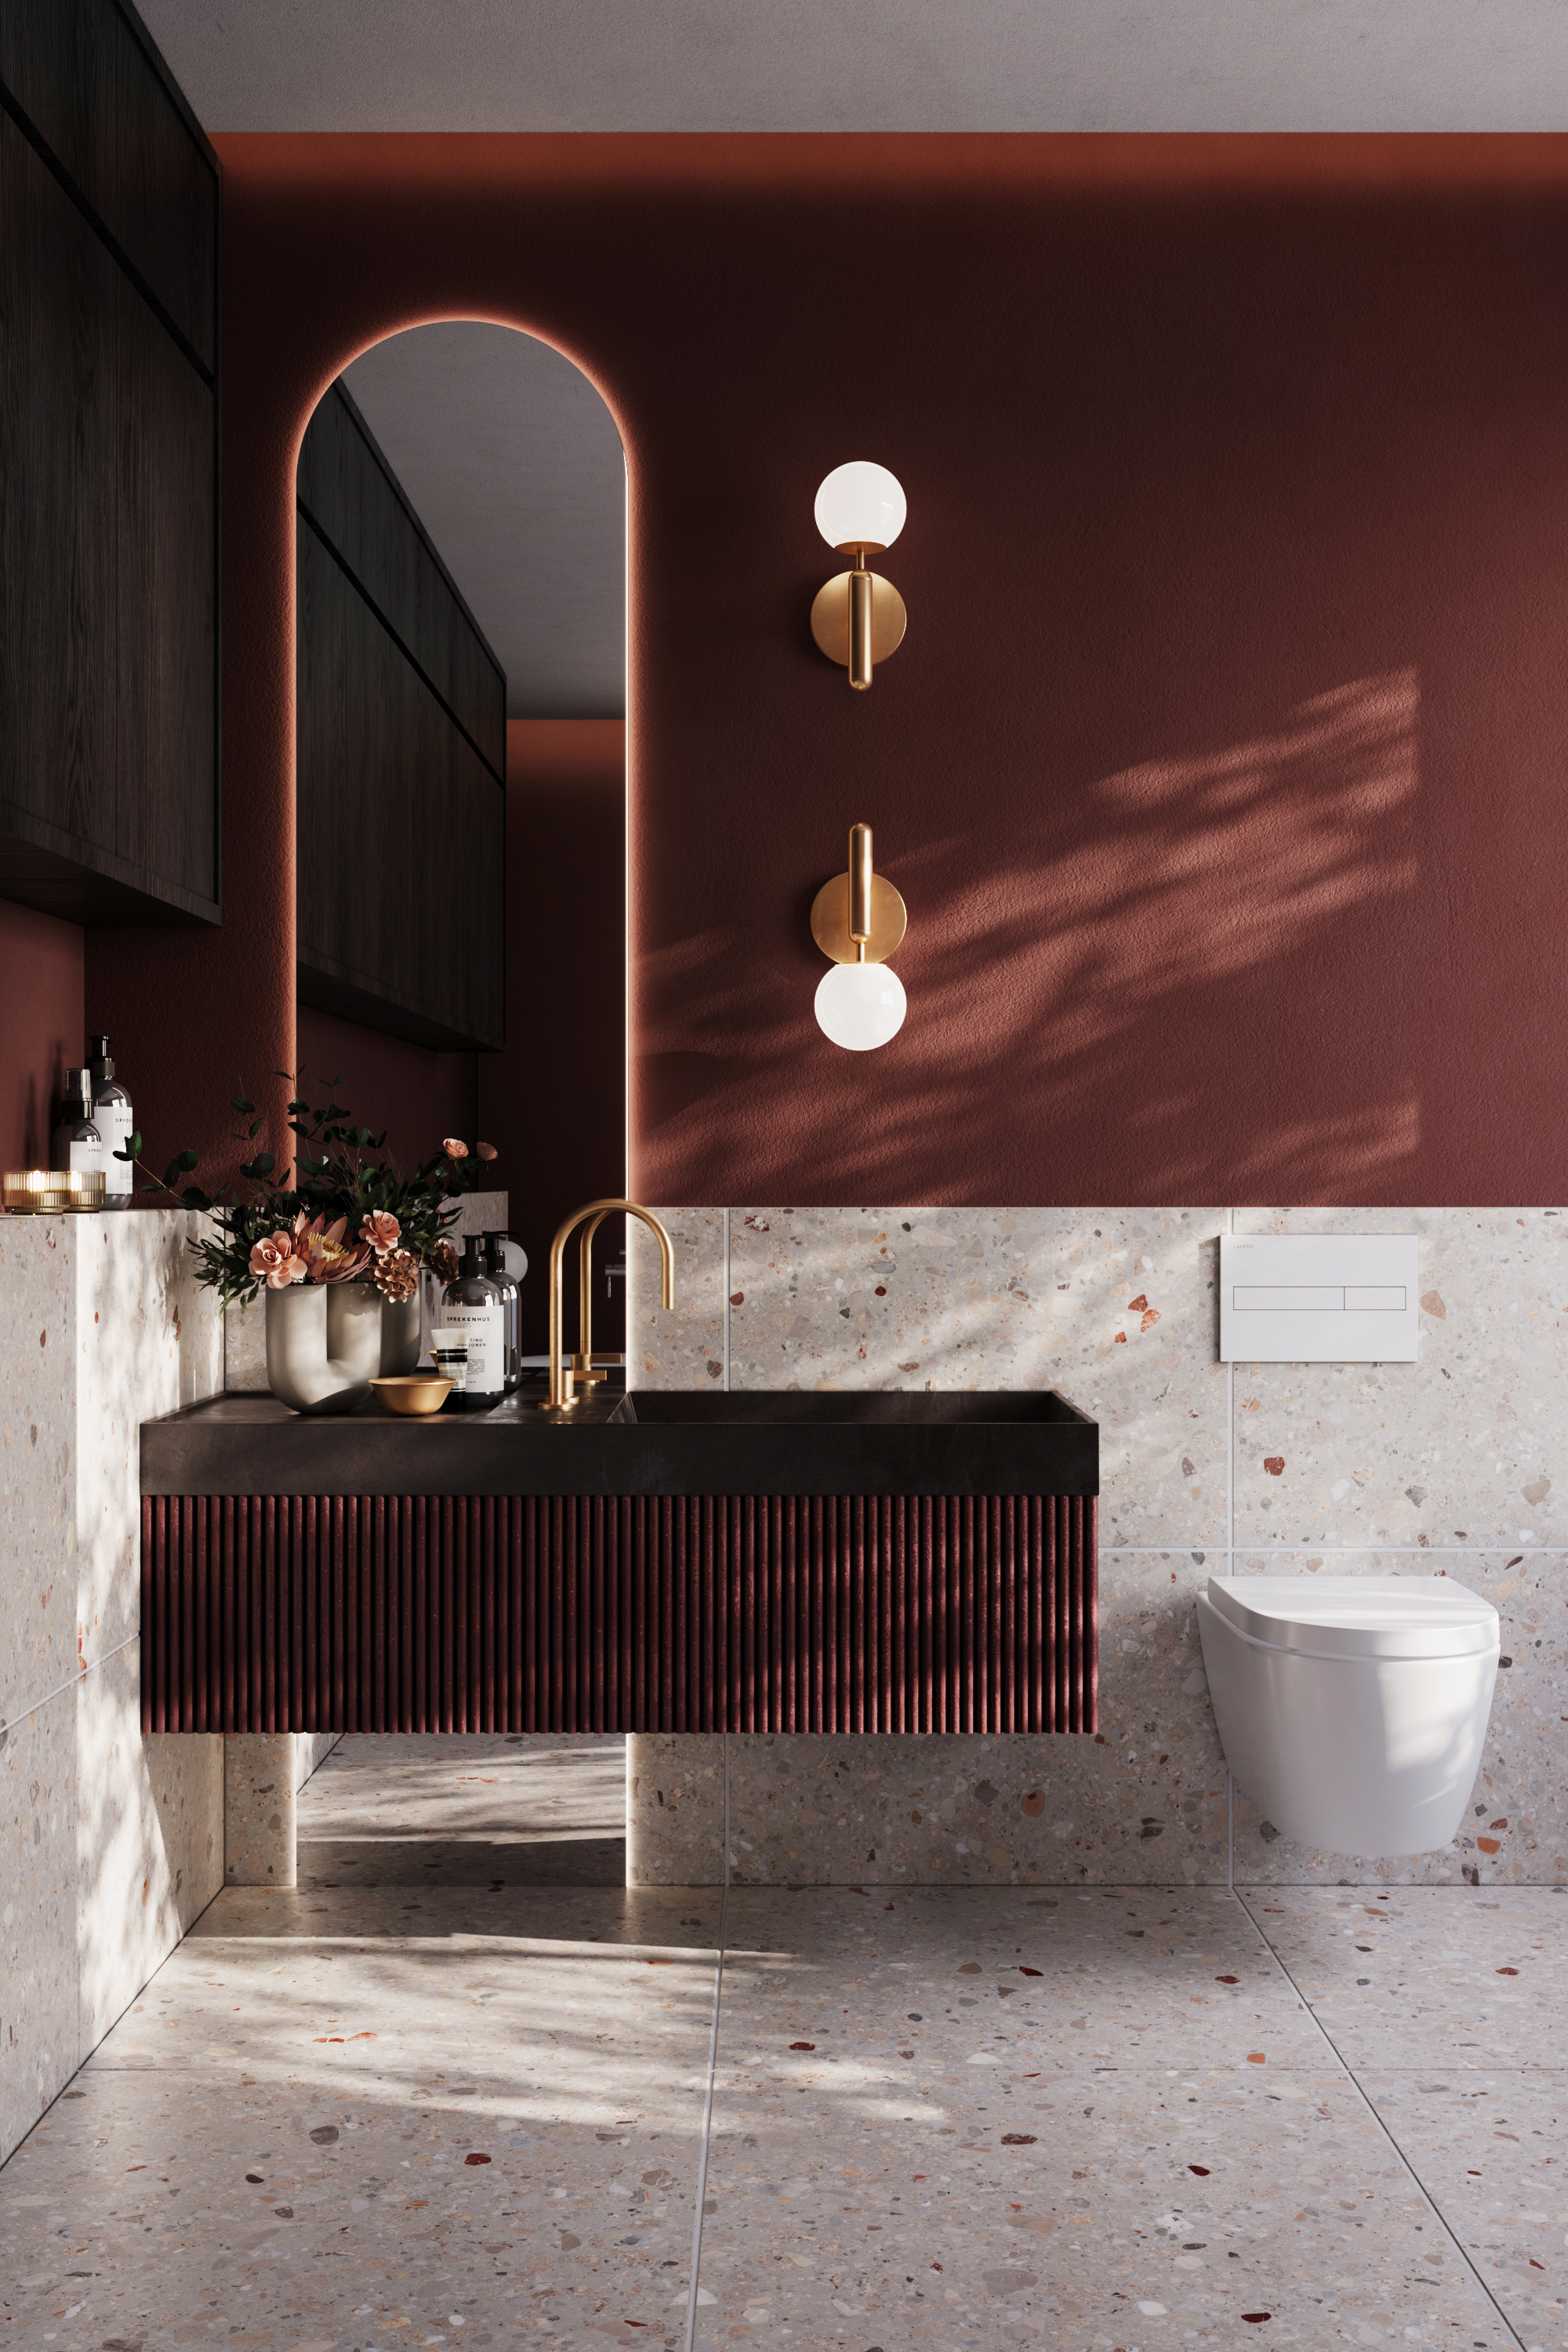 The Art of Sophisticated Bathrooms: A Look at Modern Design